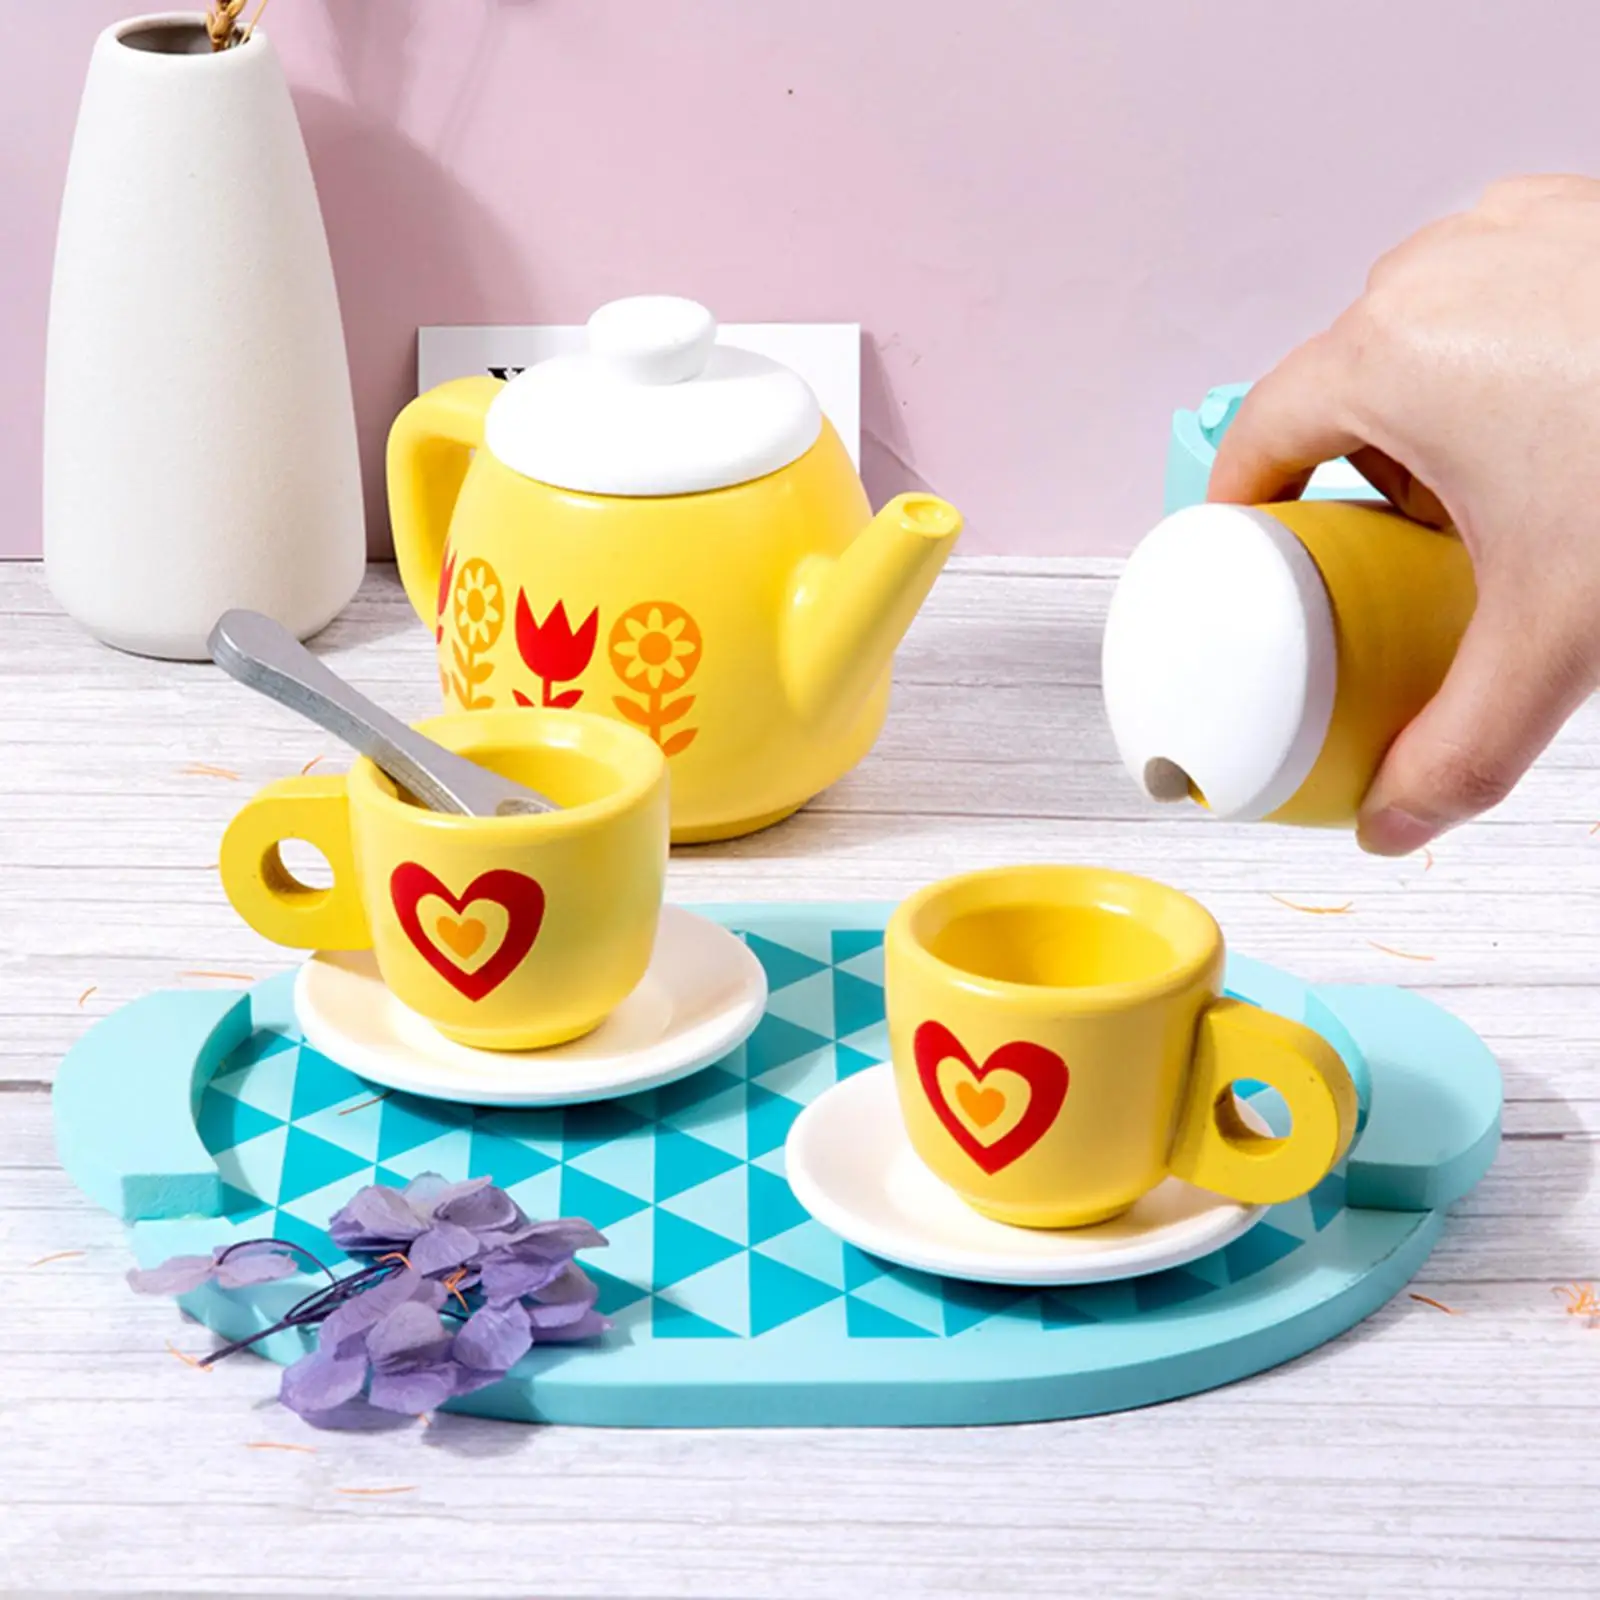 8 Pieces Children Tea Party Set Kitchen Tableware Set for Play Toy Toddlers